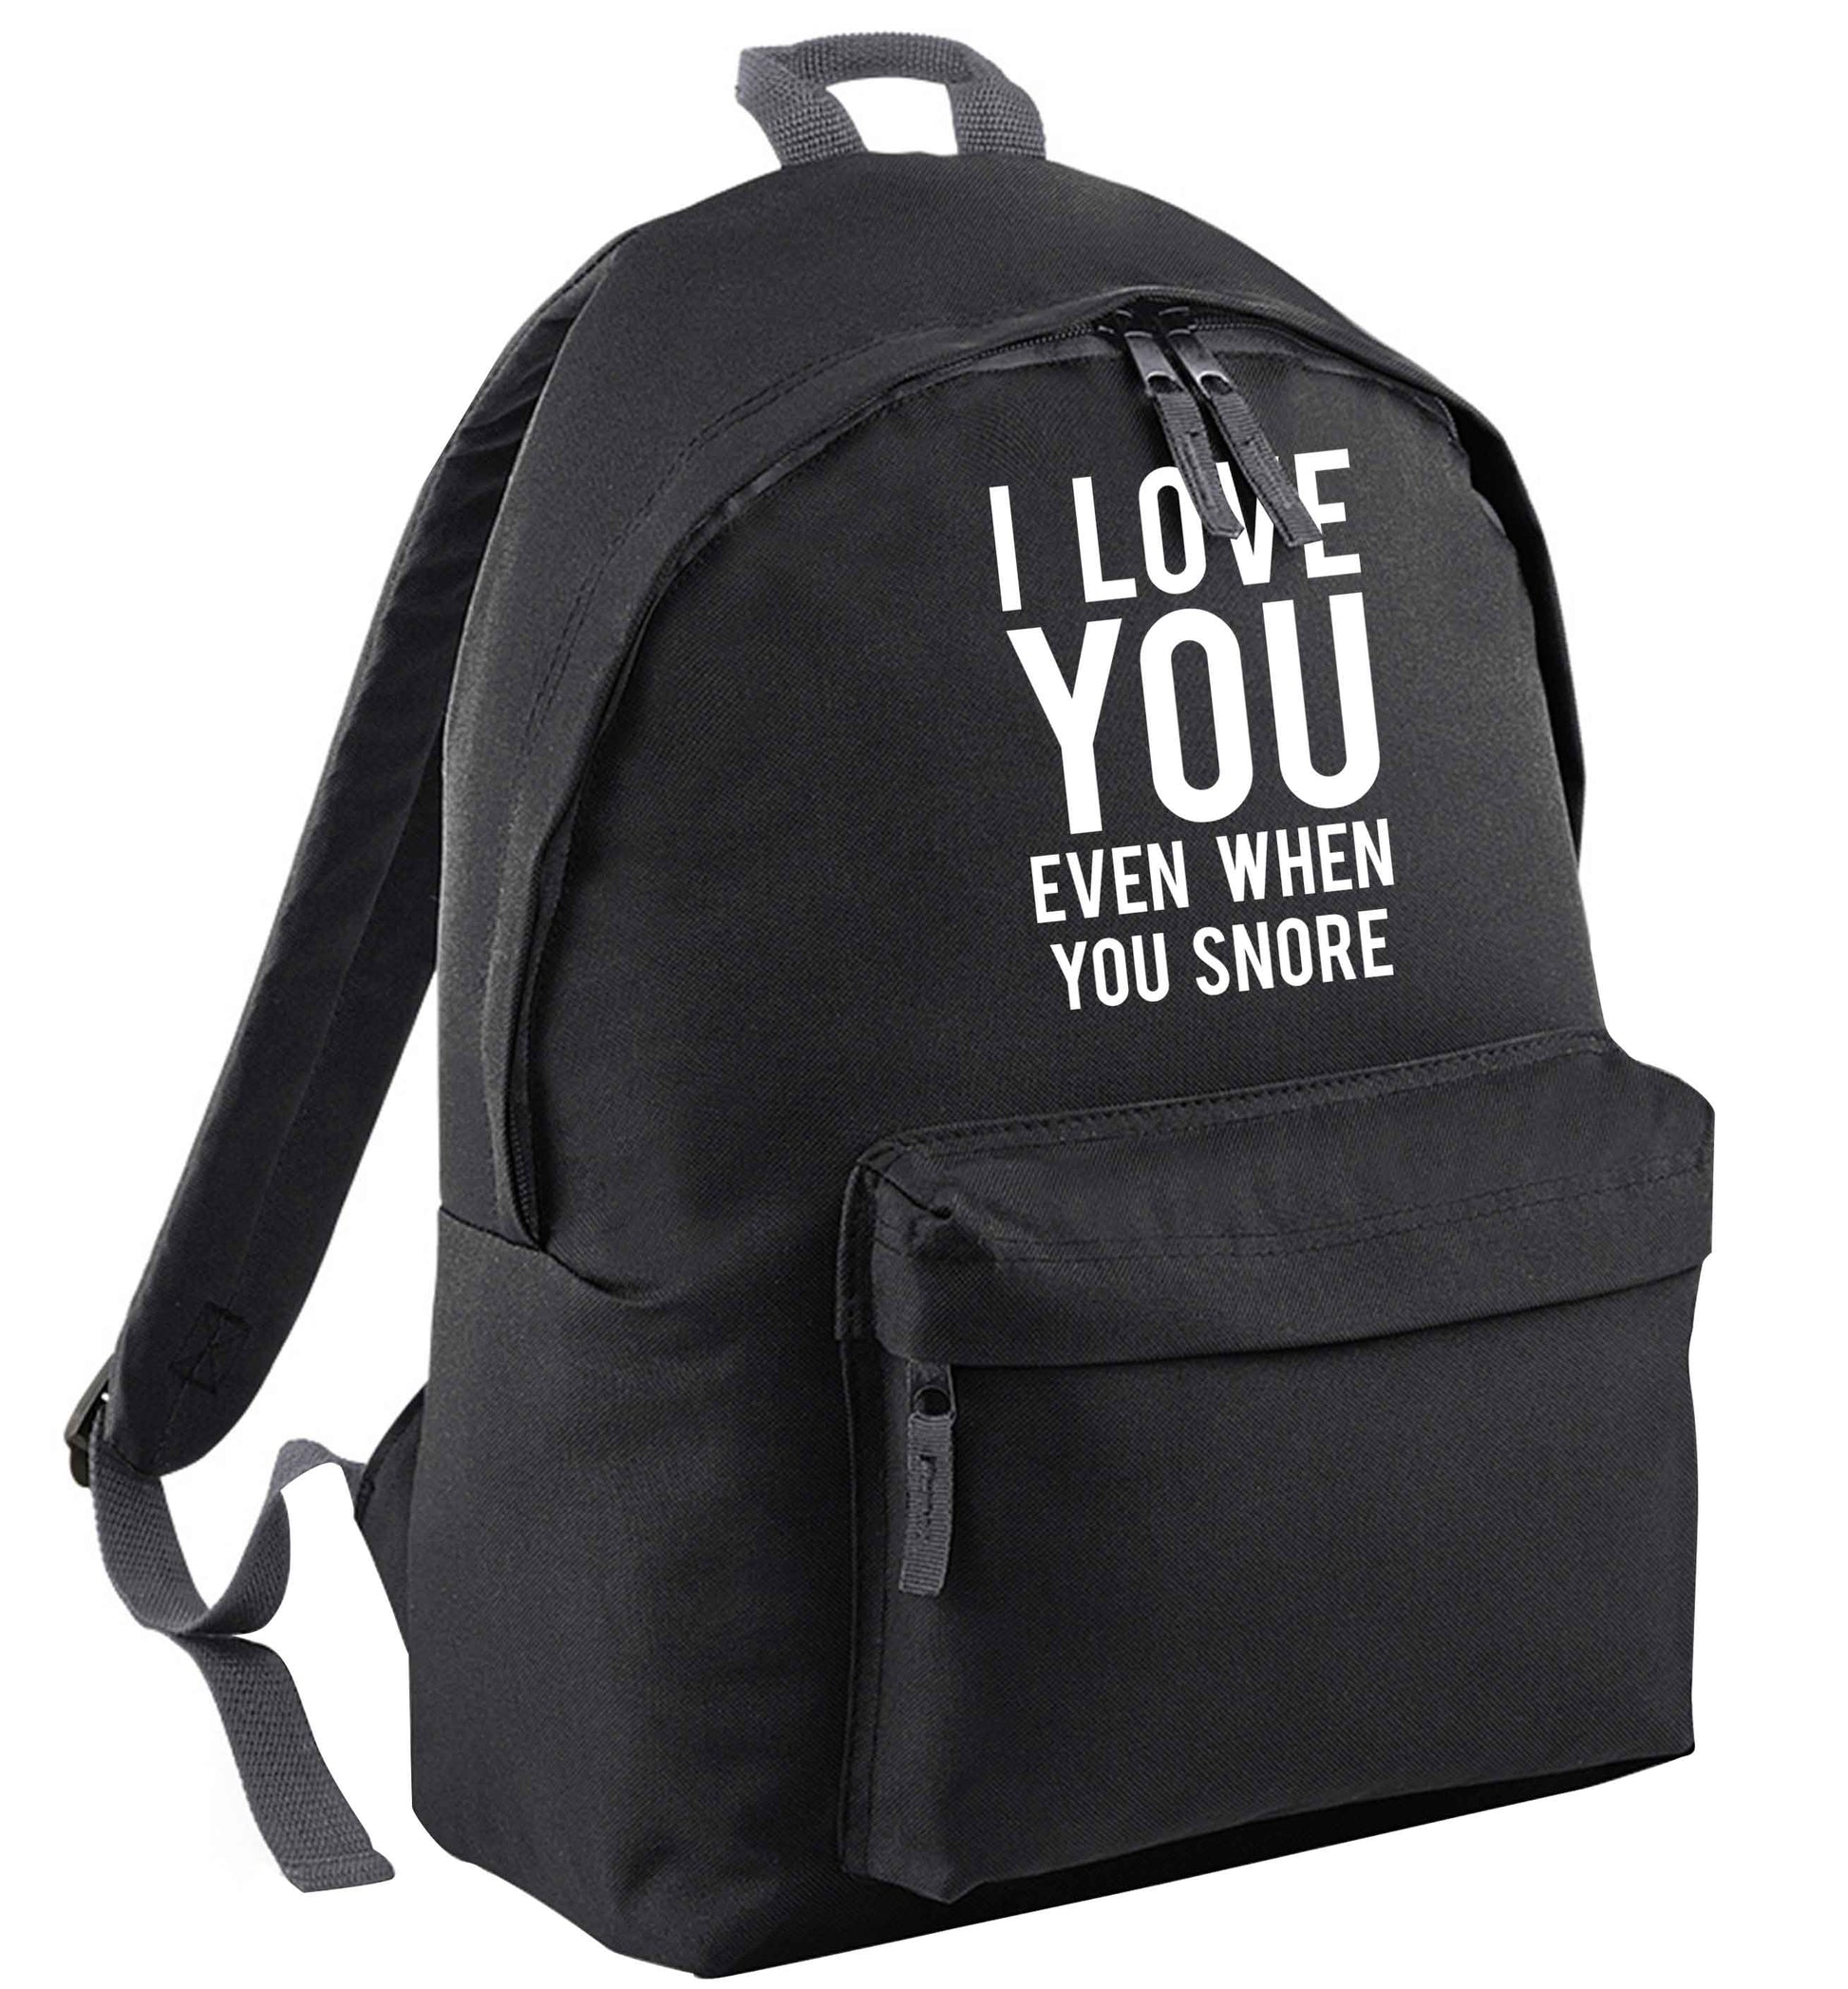 I love you even when you snore | Children's backpack